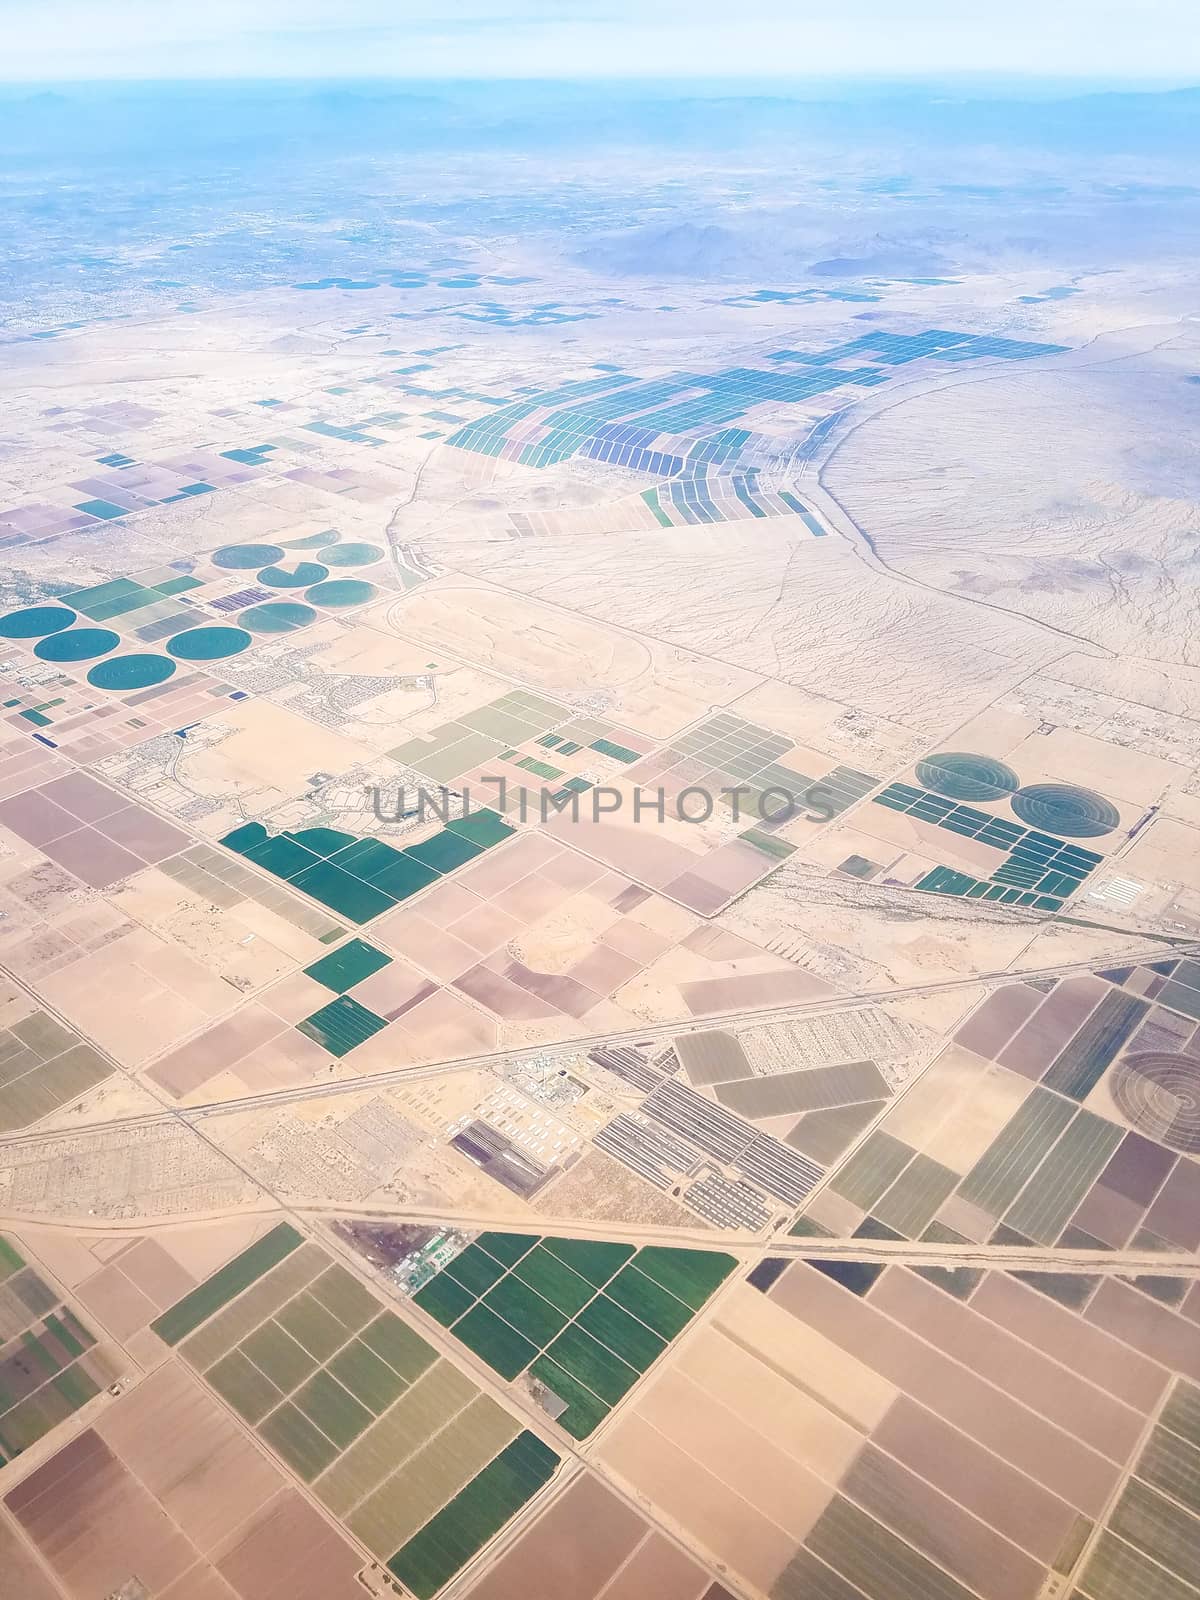 Fields of Arizona, USA, seen from above, with a few neighborhoods in the city of Maricopa.